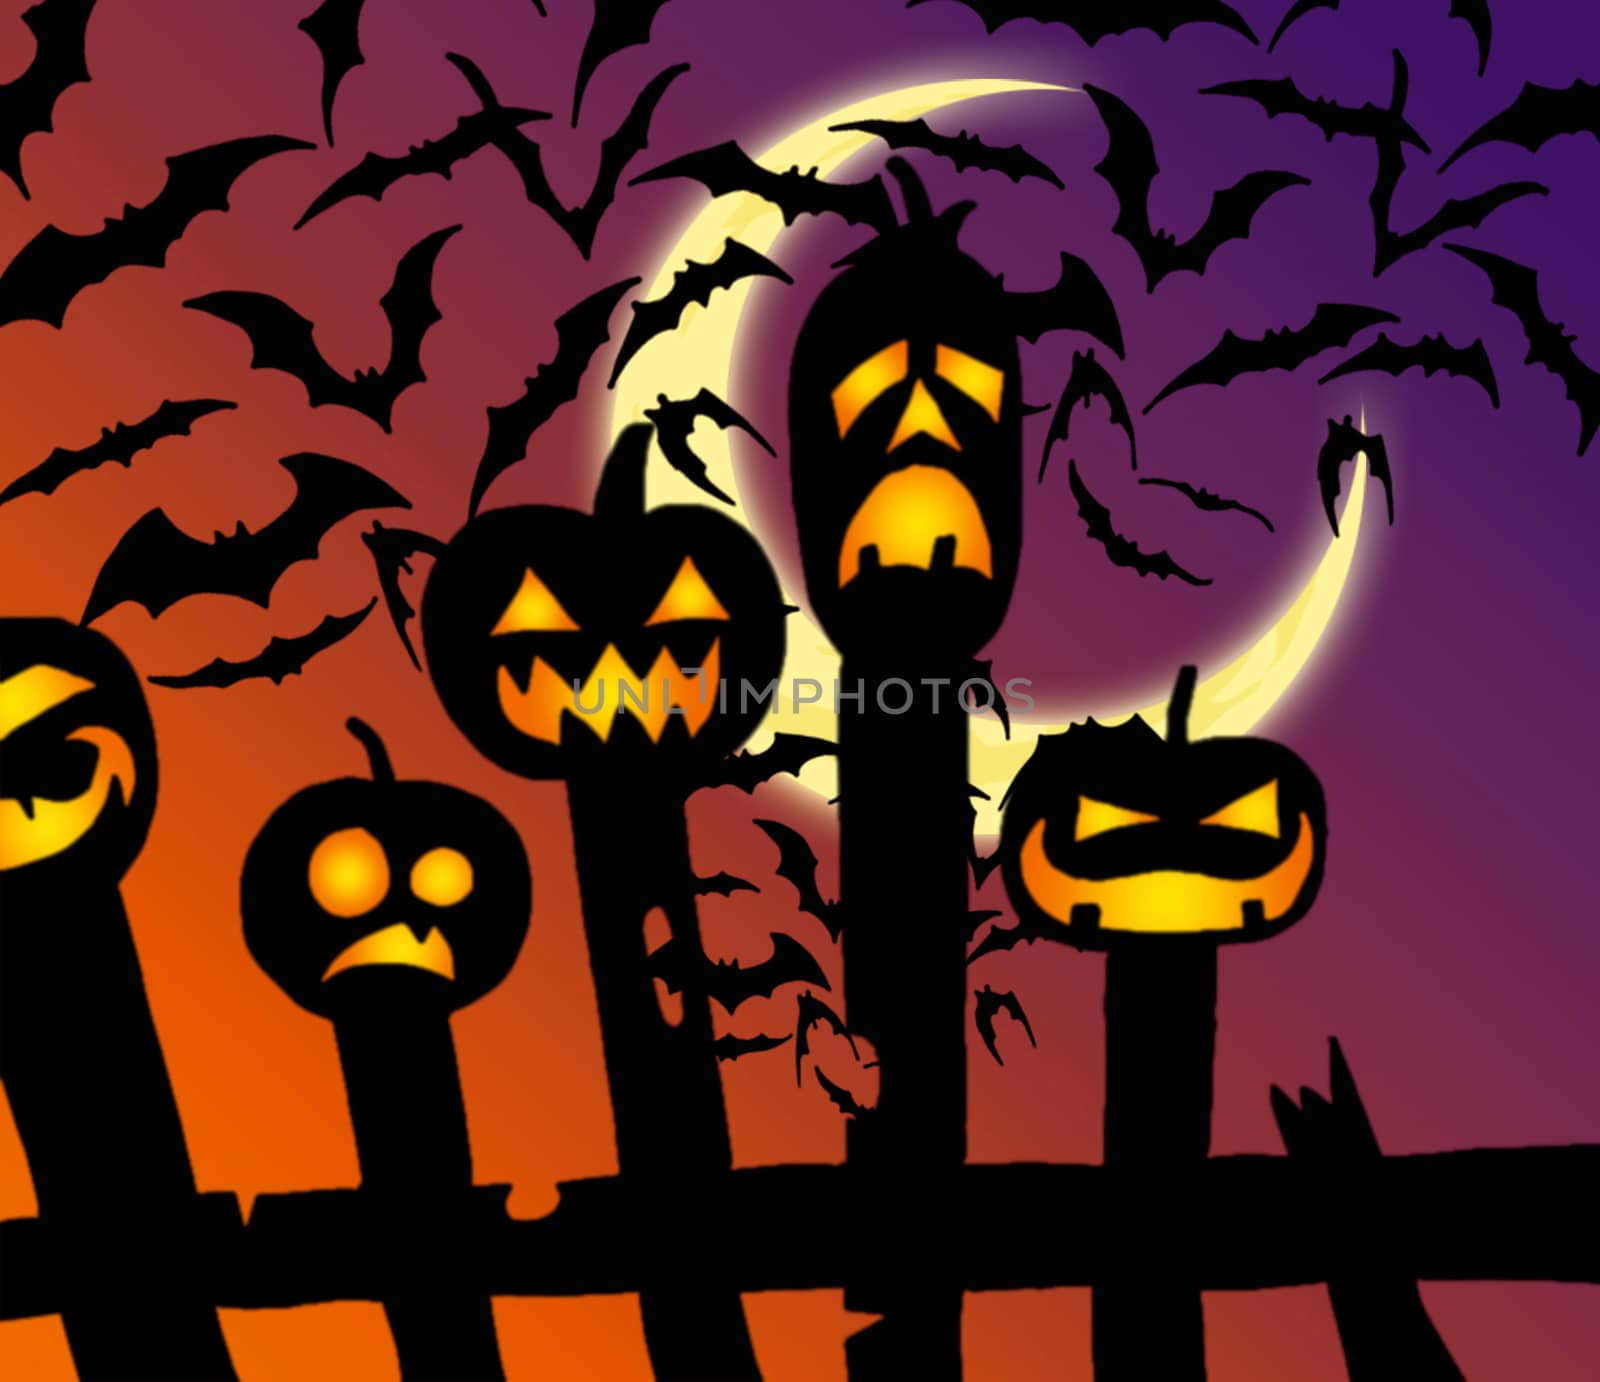 Jack-o-lanterns on fence posts with scary bats in background with moon